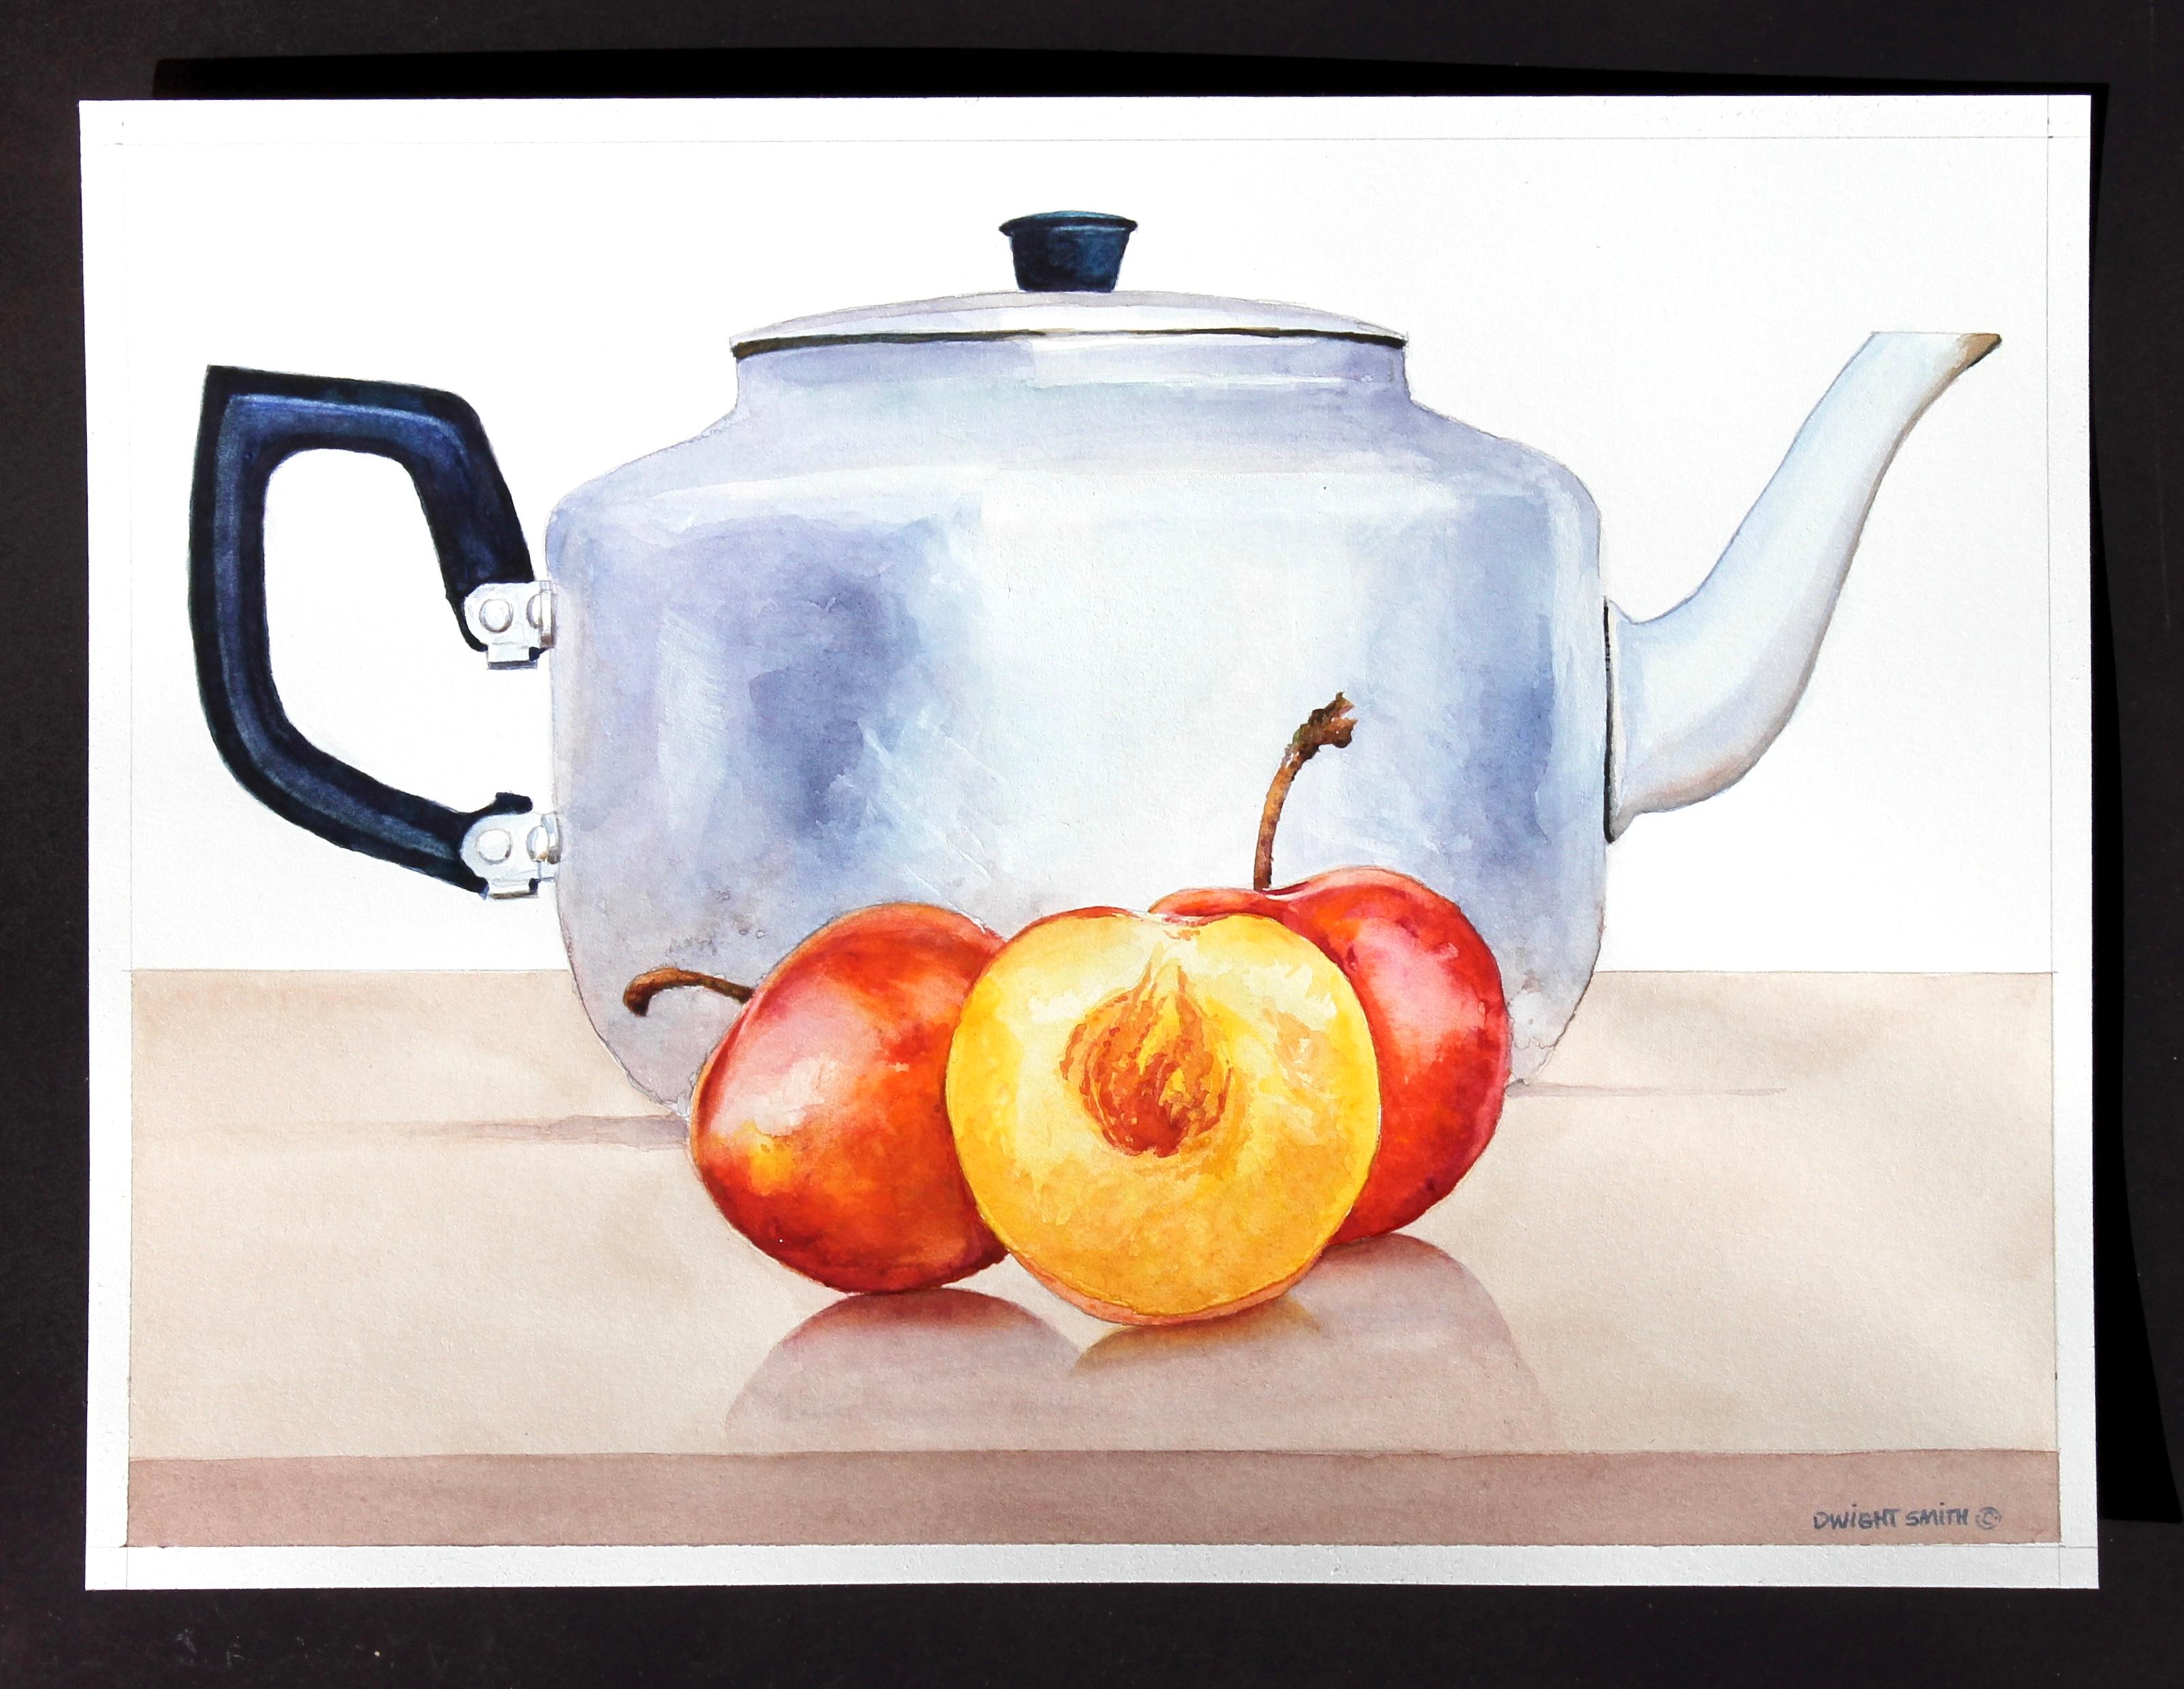 <p>Artist Comments<br>The teapot's handle and spout mirror the stems of the plums. The interplay of the sturdy, metallic exterior of the container with the vibrant and soft flesh and skin of the fruits adds a dynamic contrast to the composition.